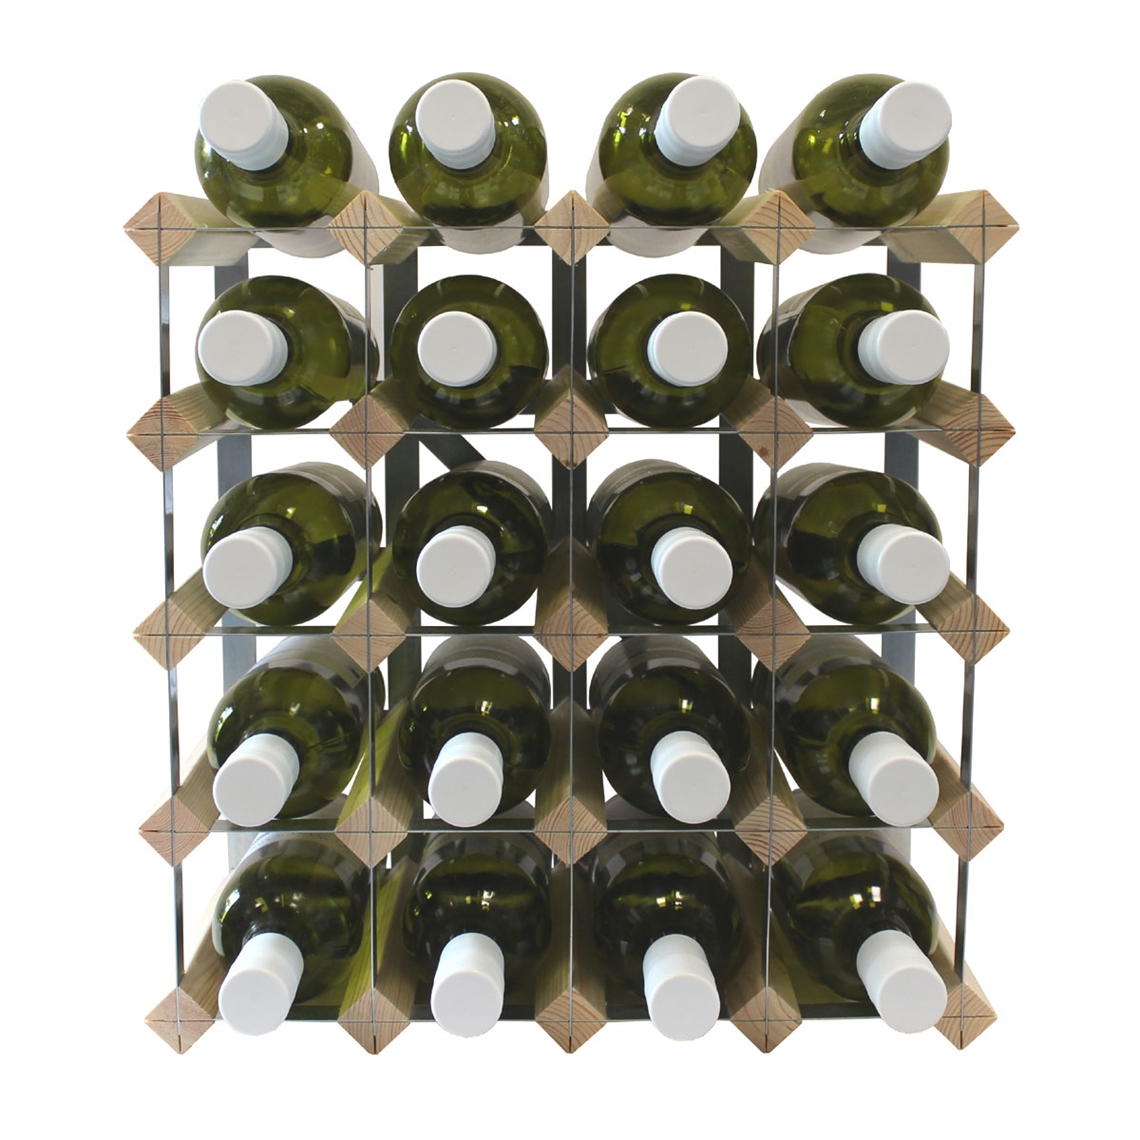 View more wine racks for restaurants, bars and shops from our Assembled Wine Racks range